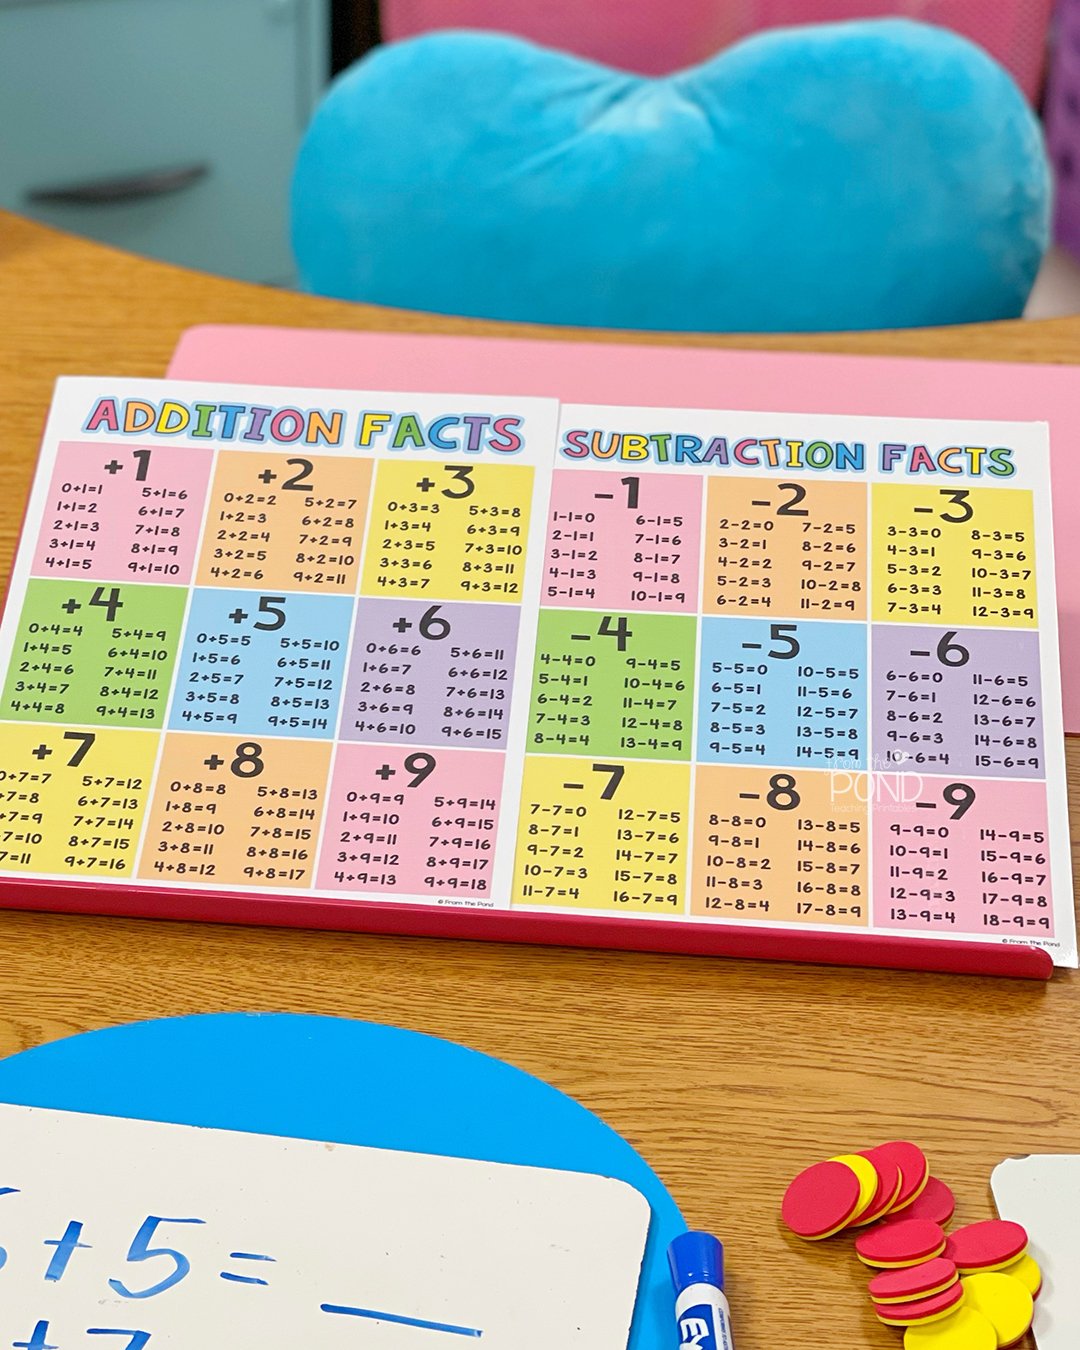 Addition Facts Poster